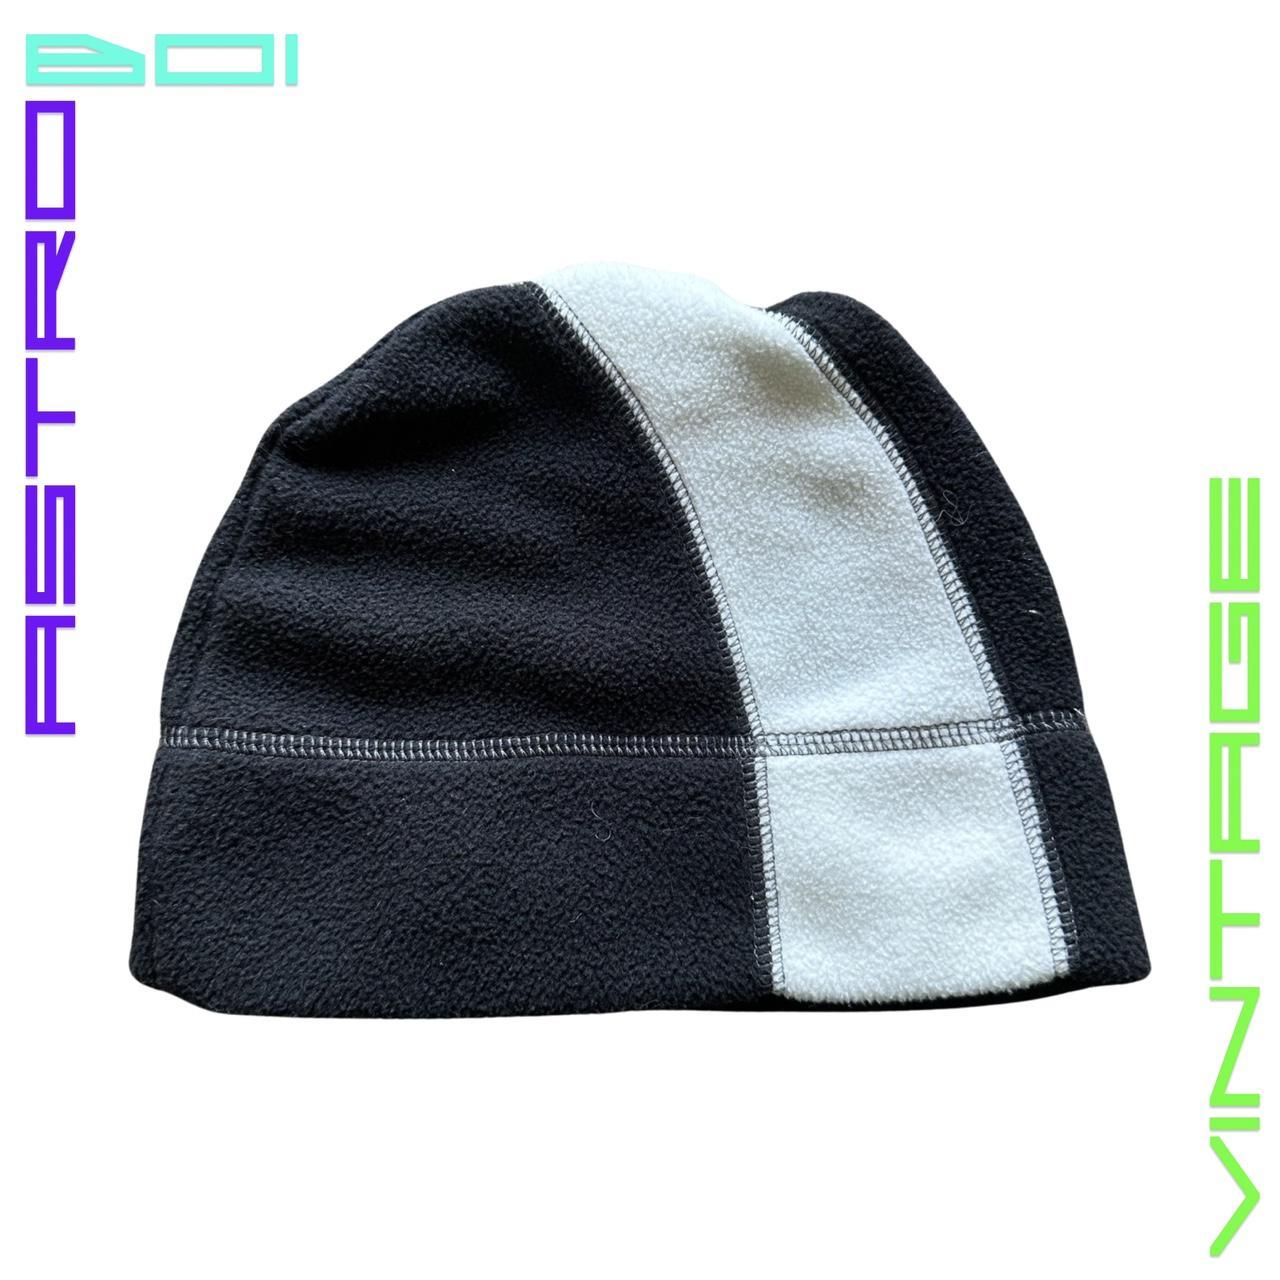 90s STYLE BLACK AND WHITE FLEECE HAT